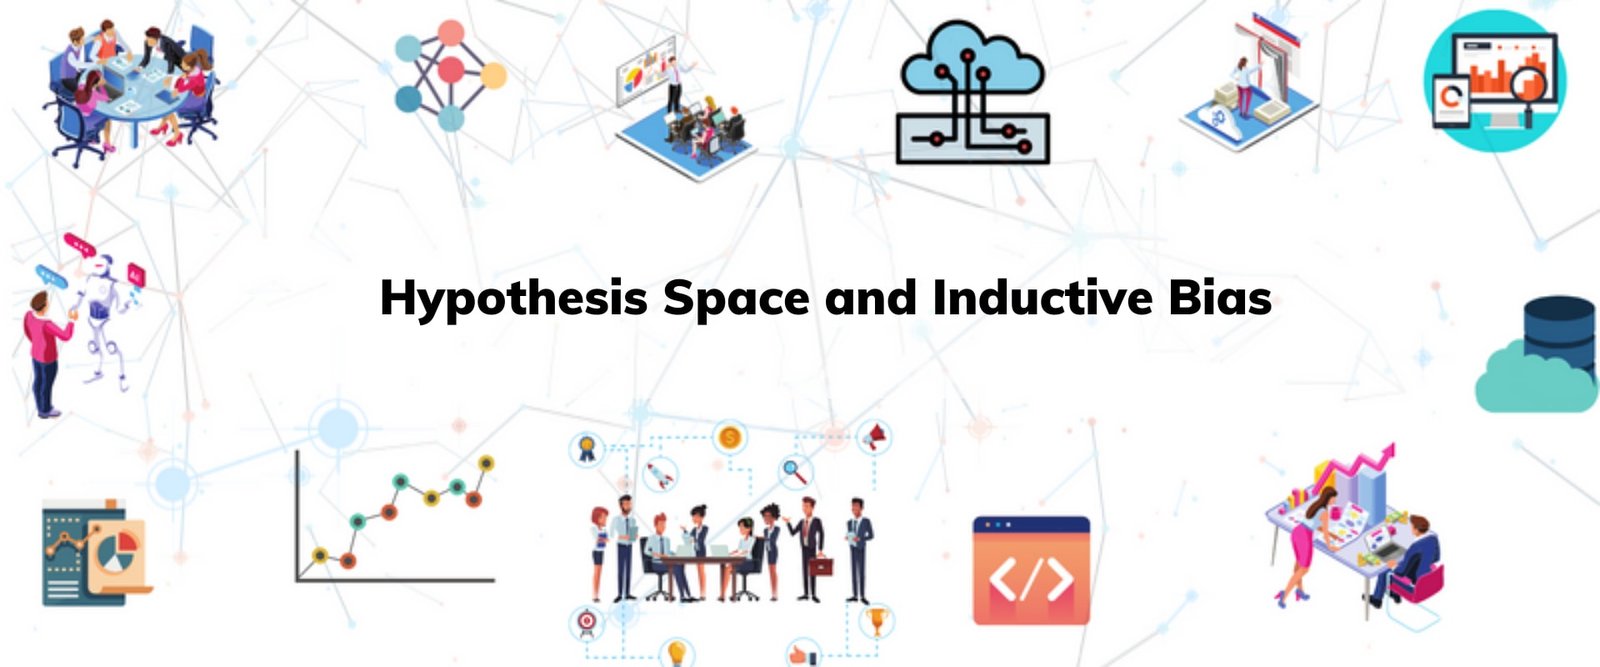 hypothesis space wikipedia